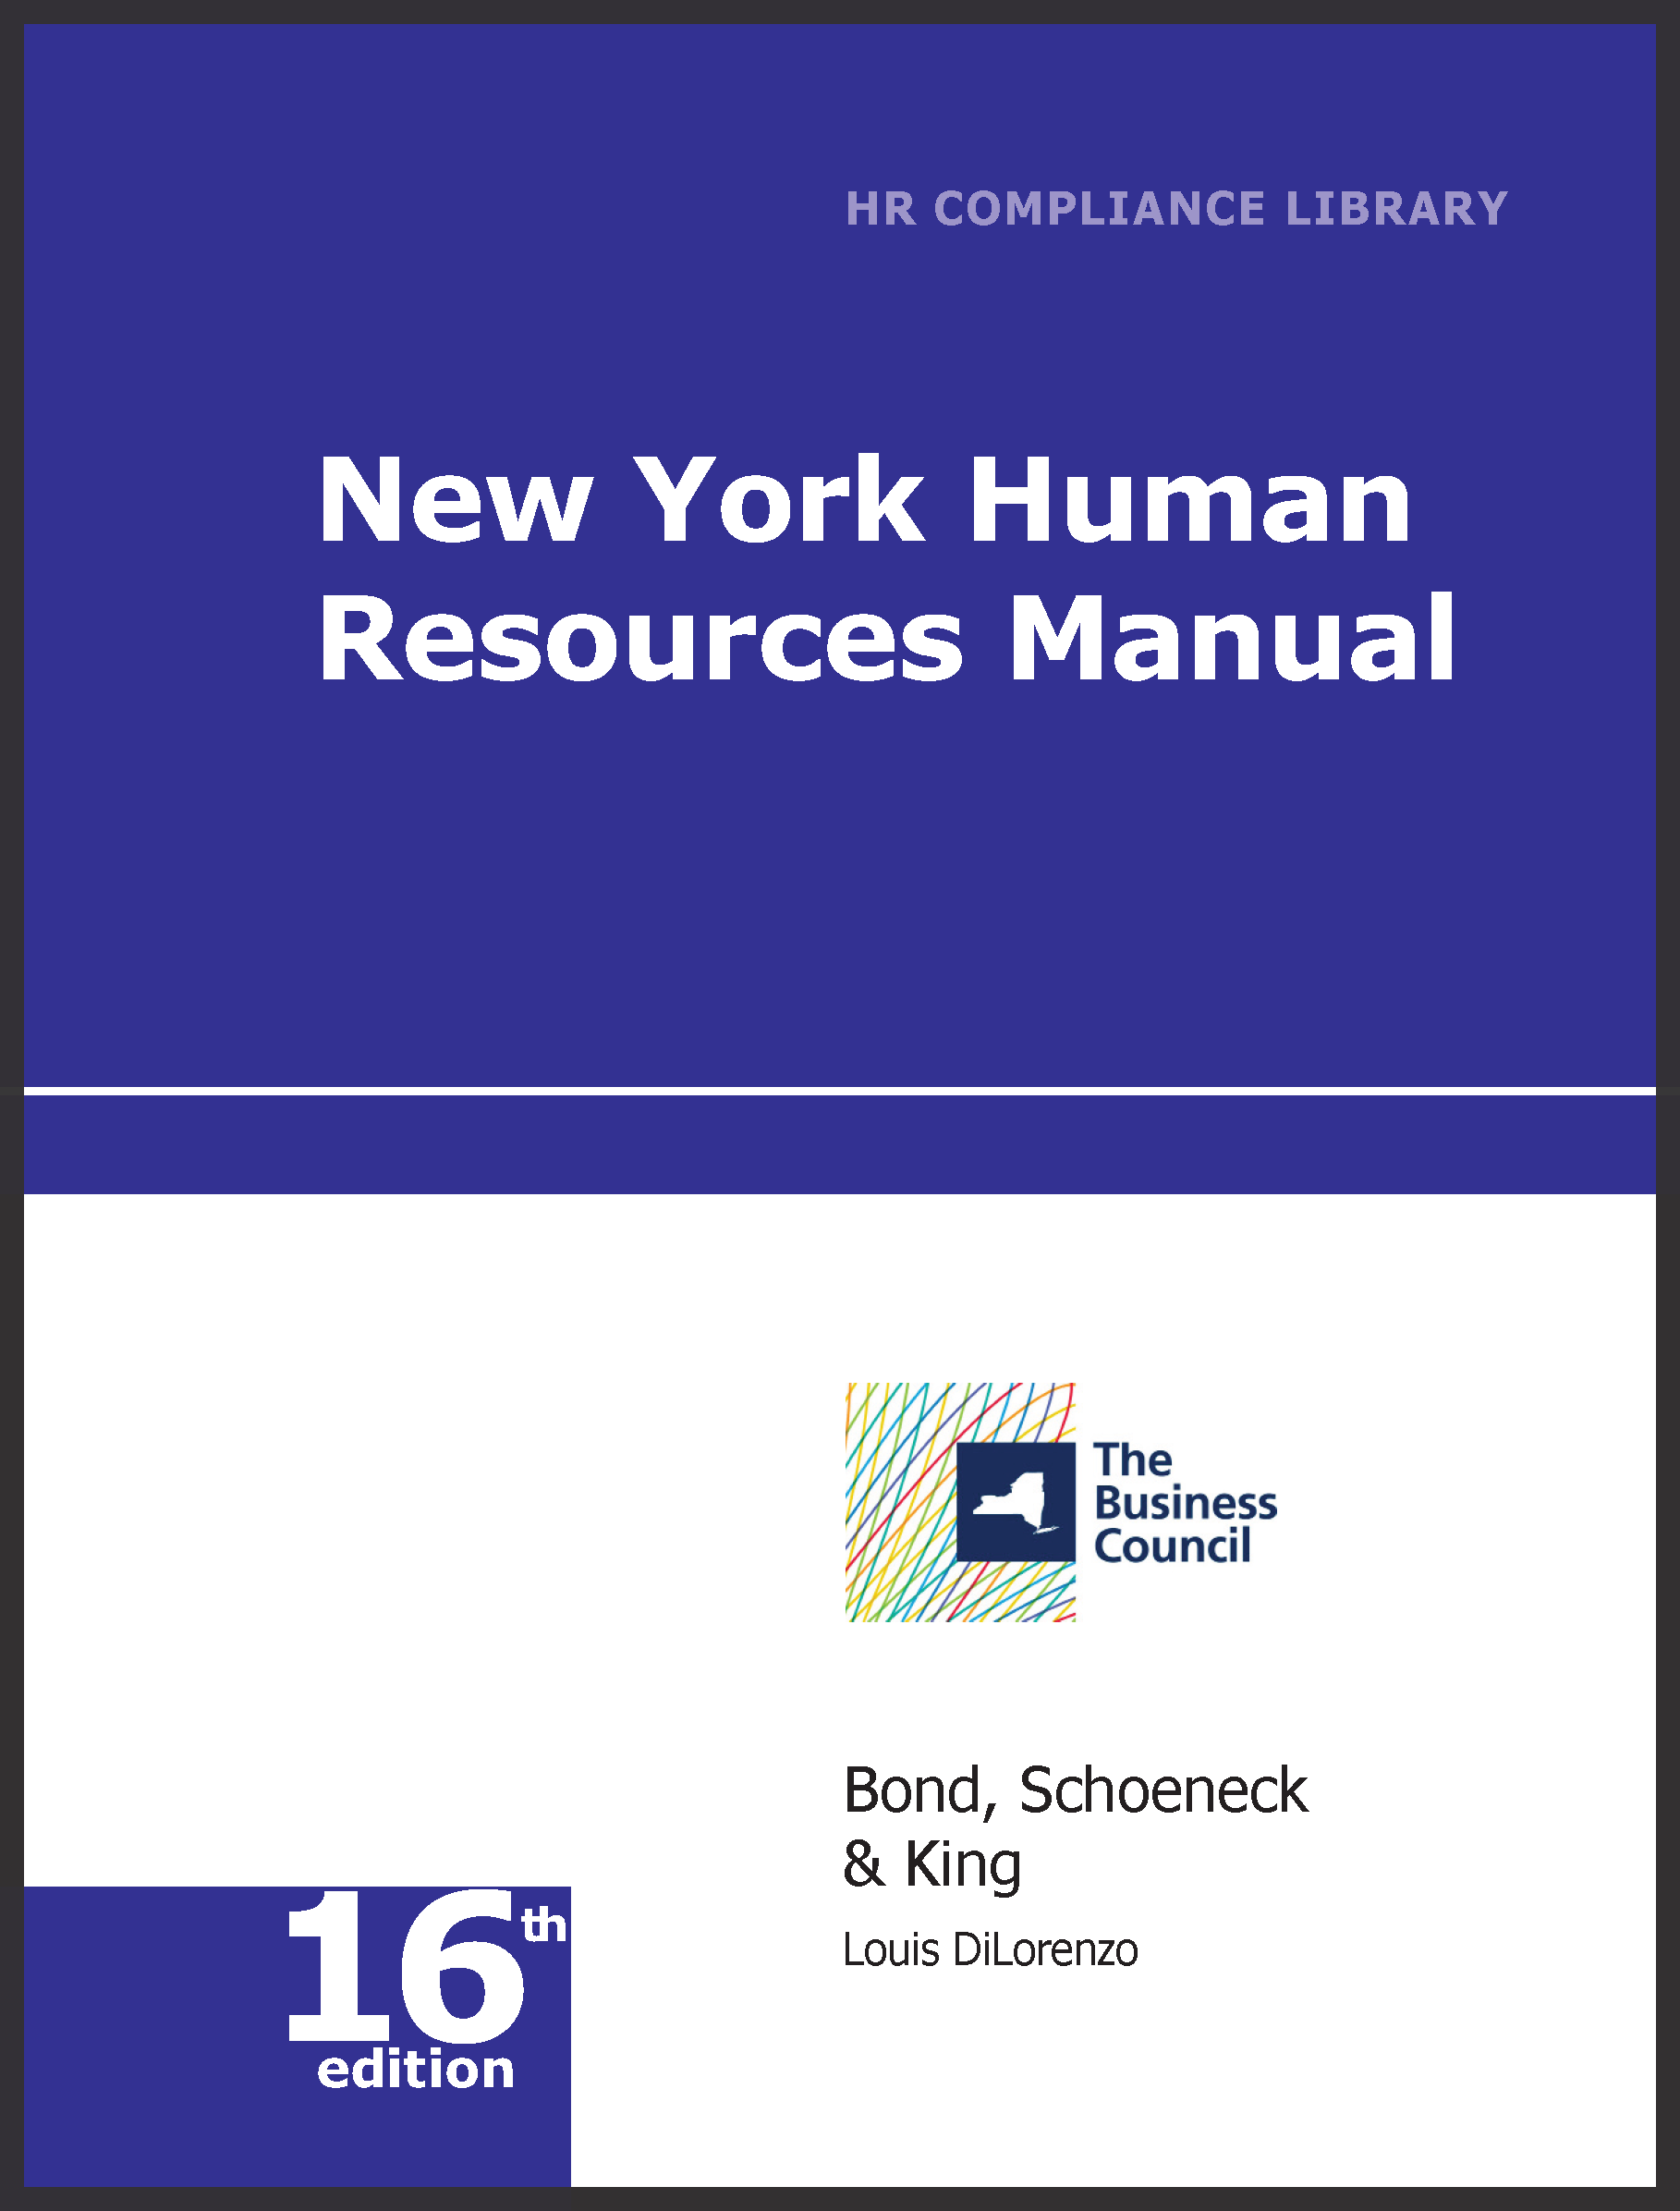 New York Human Resources Library—Online Only employment law image, remote work, labor laws, employment laws, right to work, order of protection, minimum wage